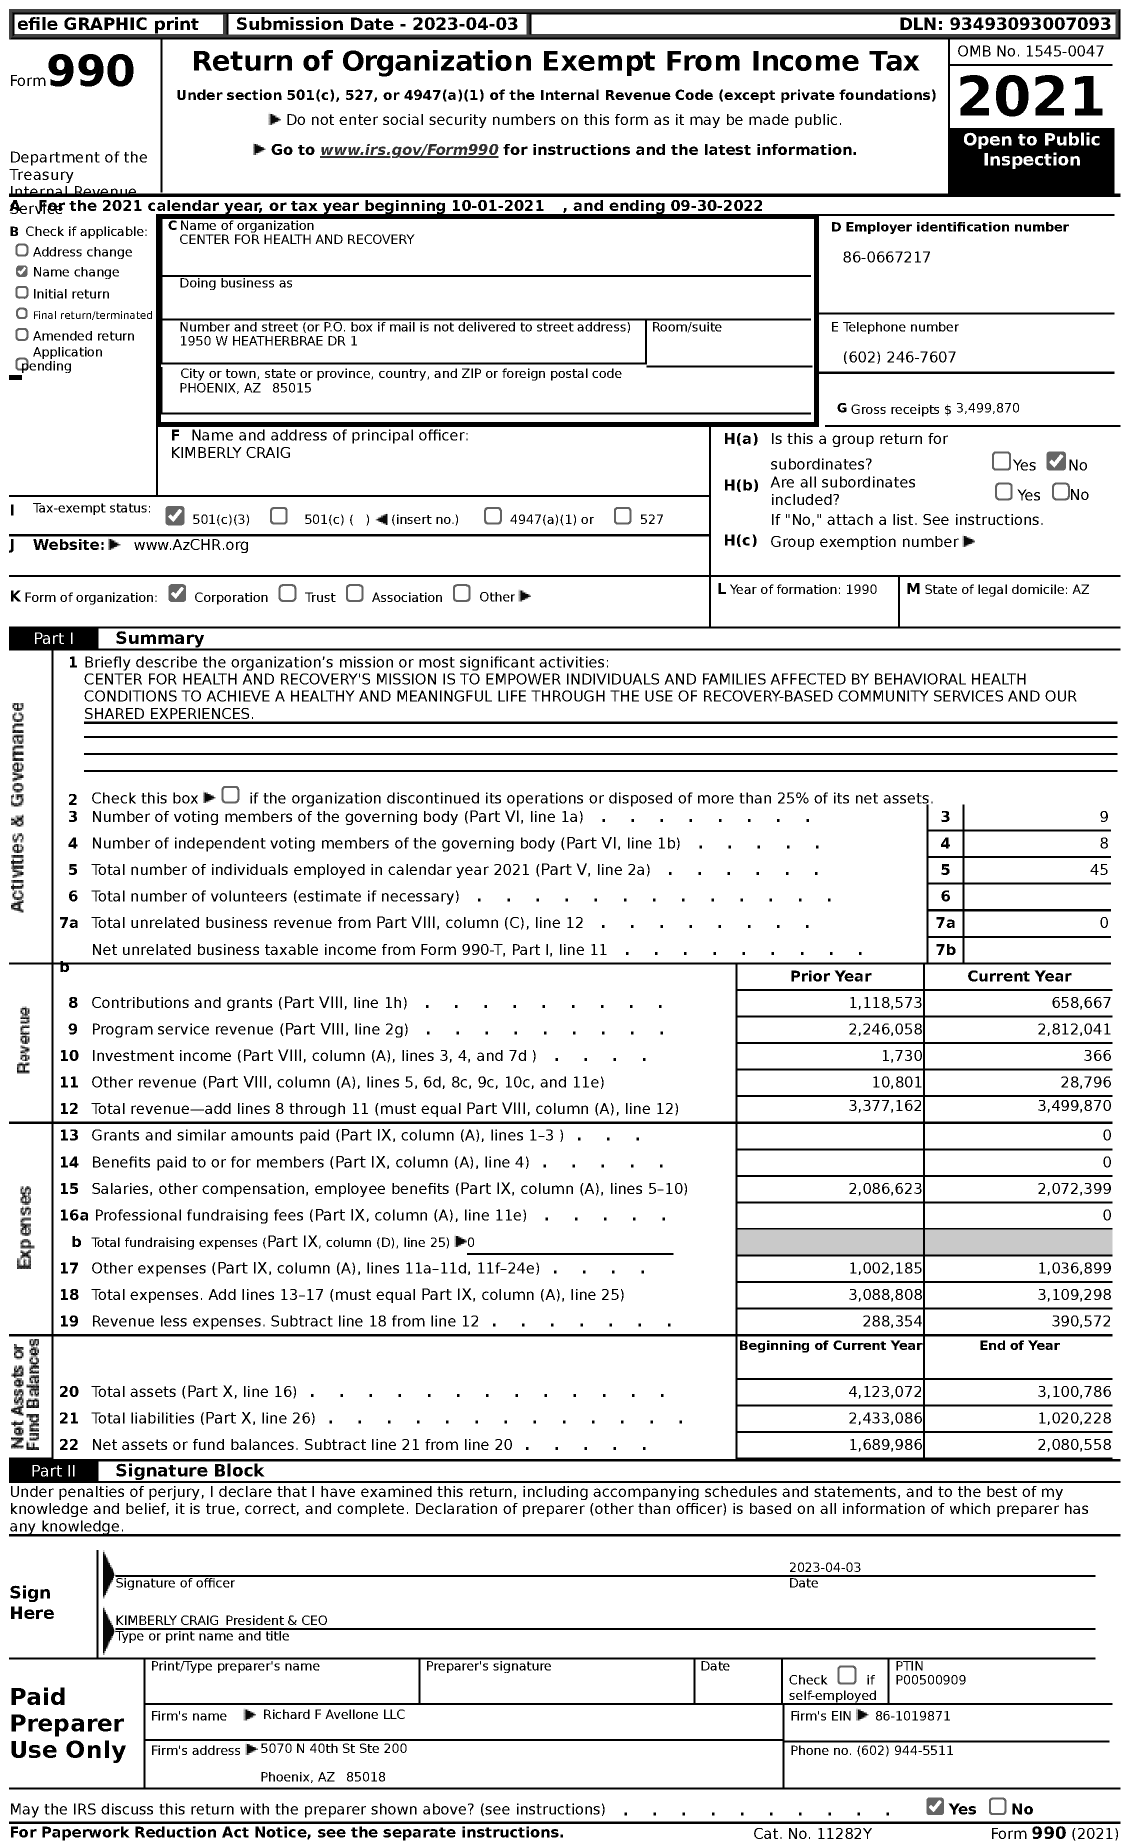 Image of first page of 2021 Form 990 for Center for Health and Recovery